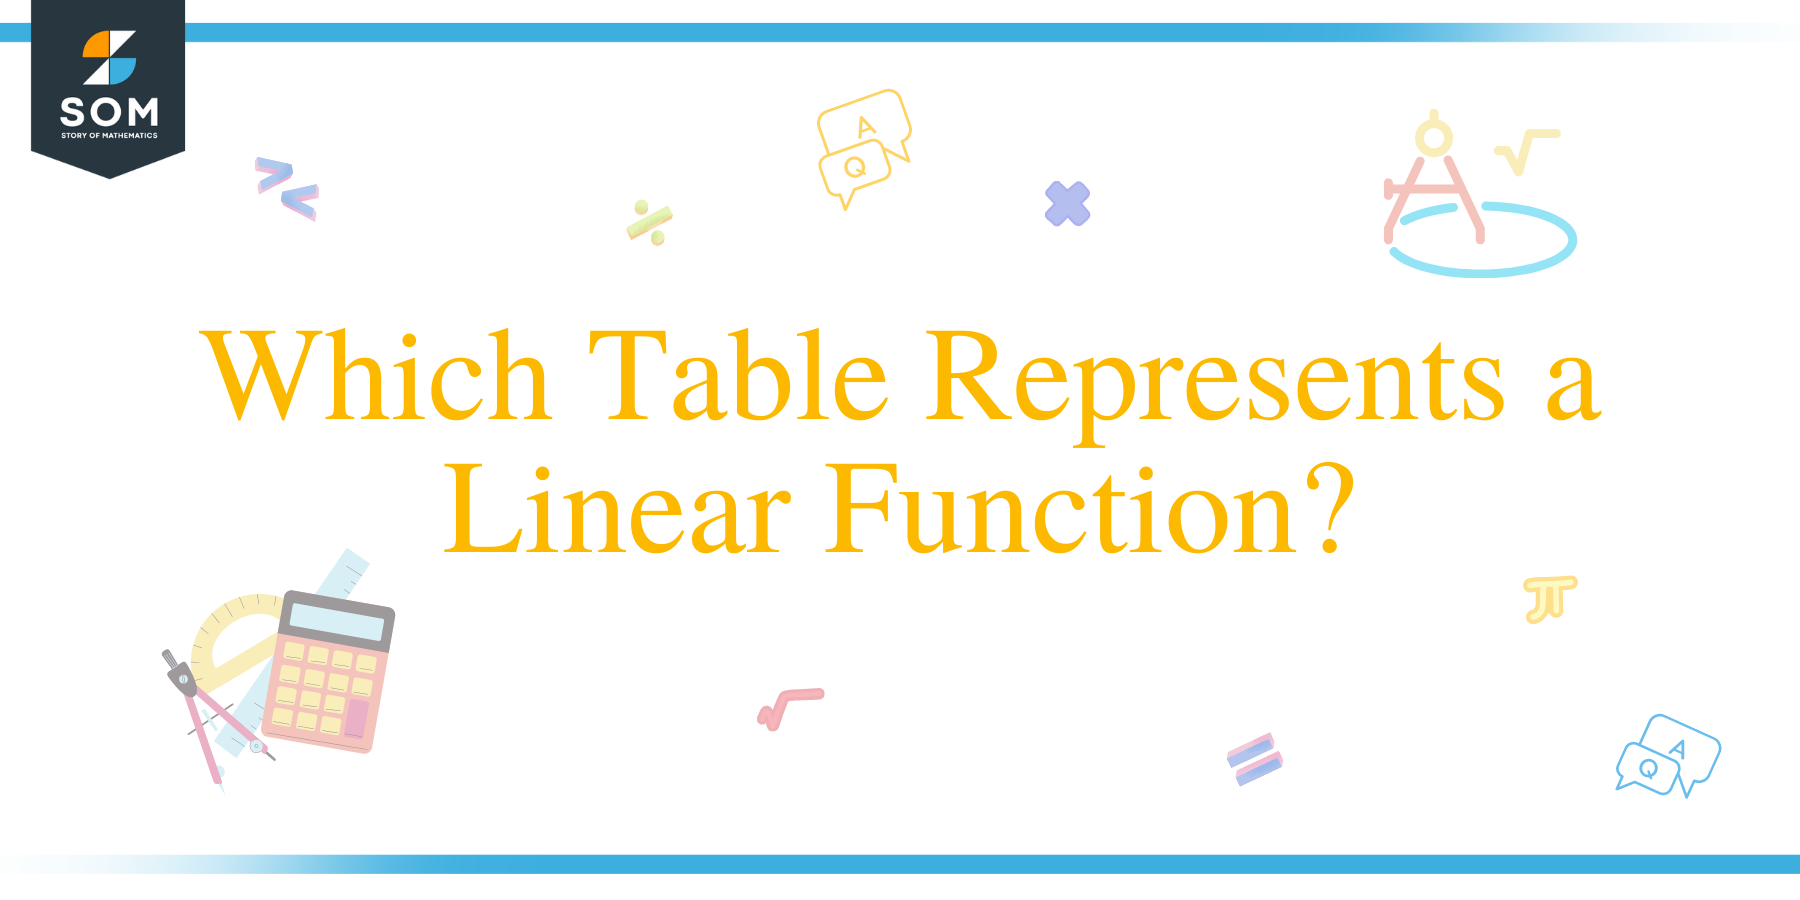 Which Table Represents a Linear Function?